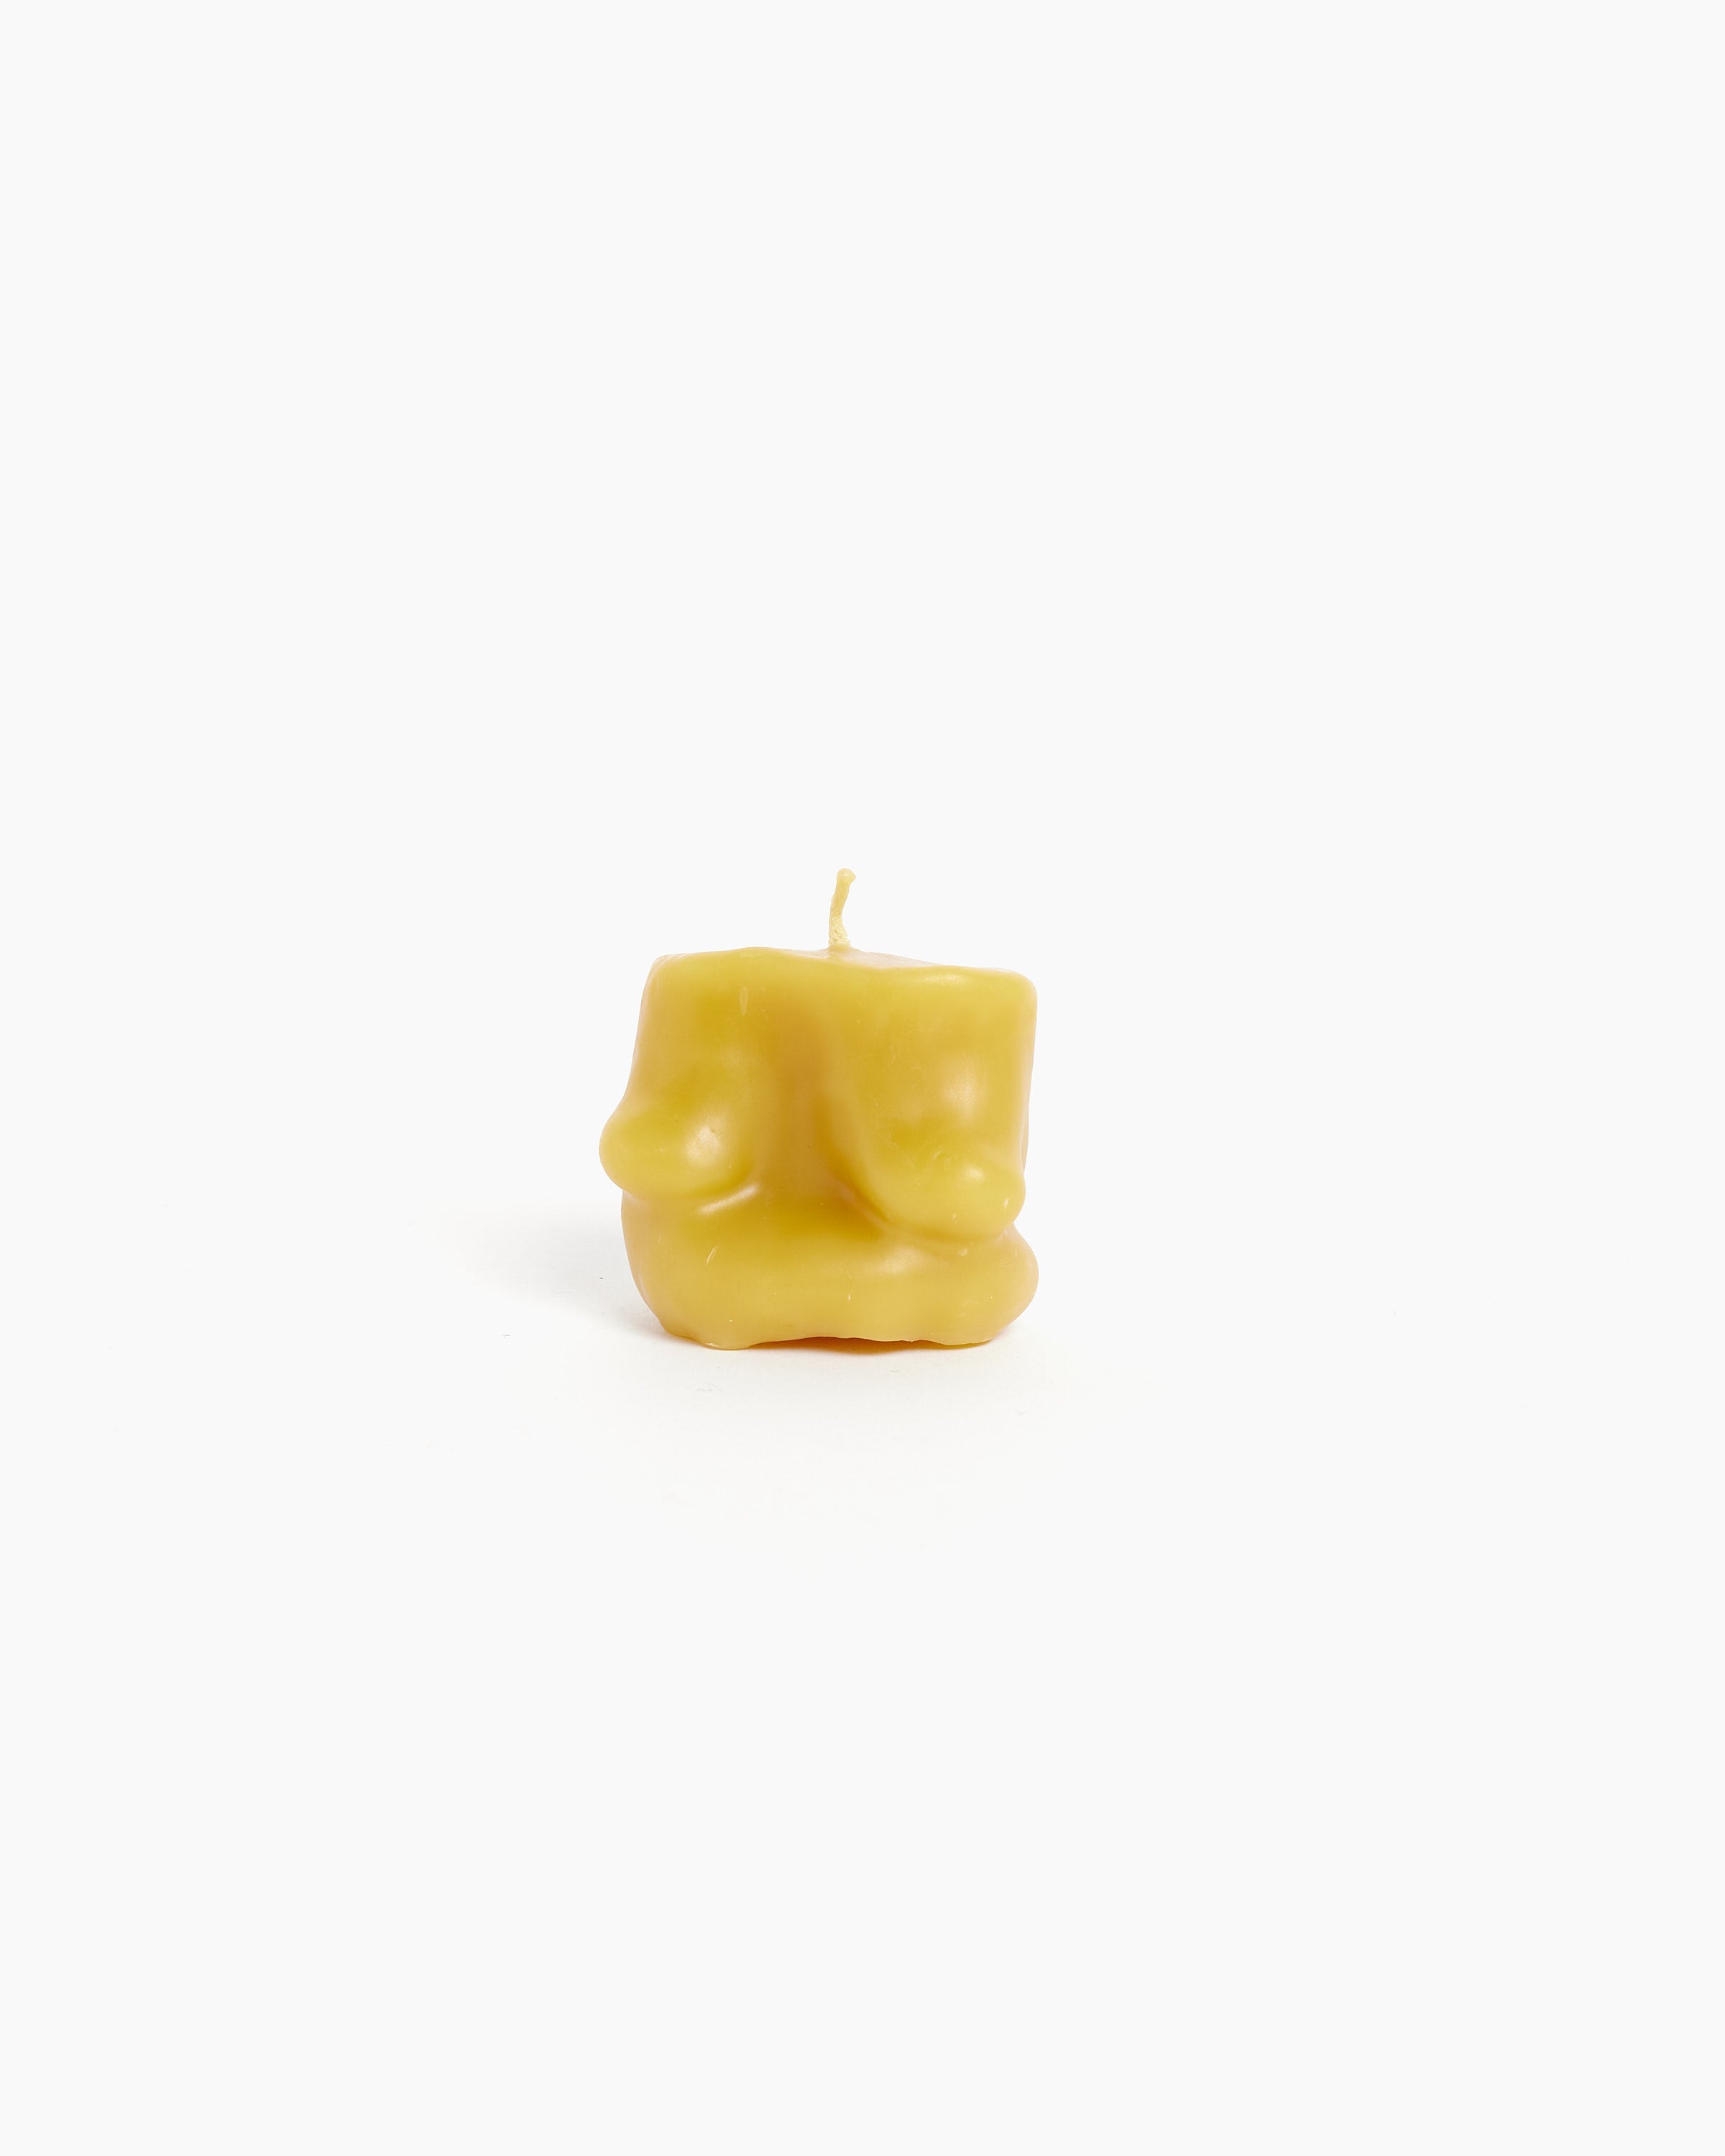 Beeswax Candles in Natural